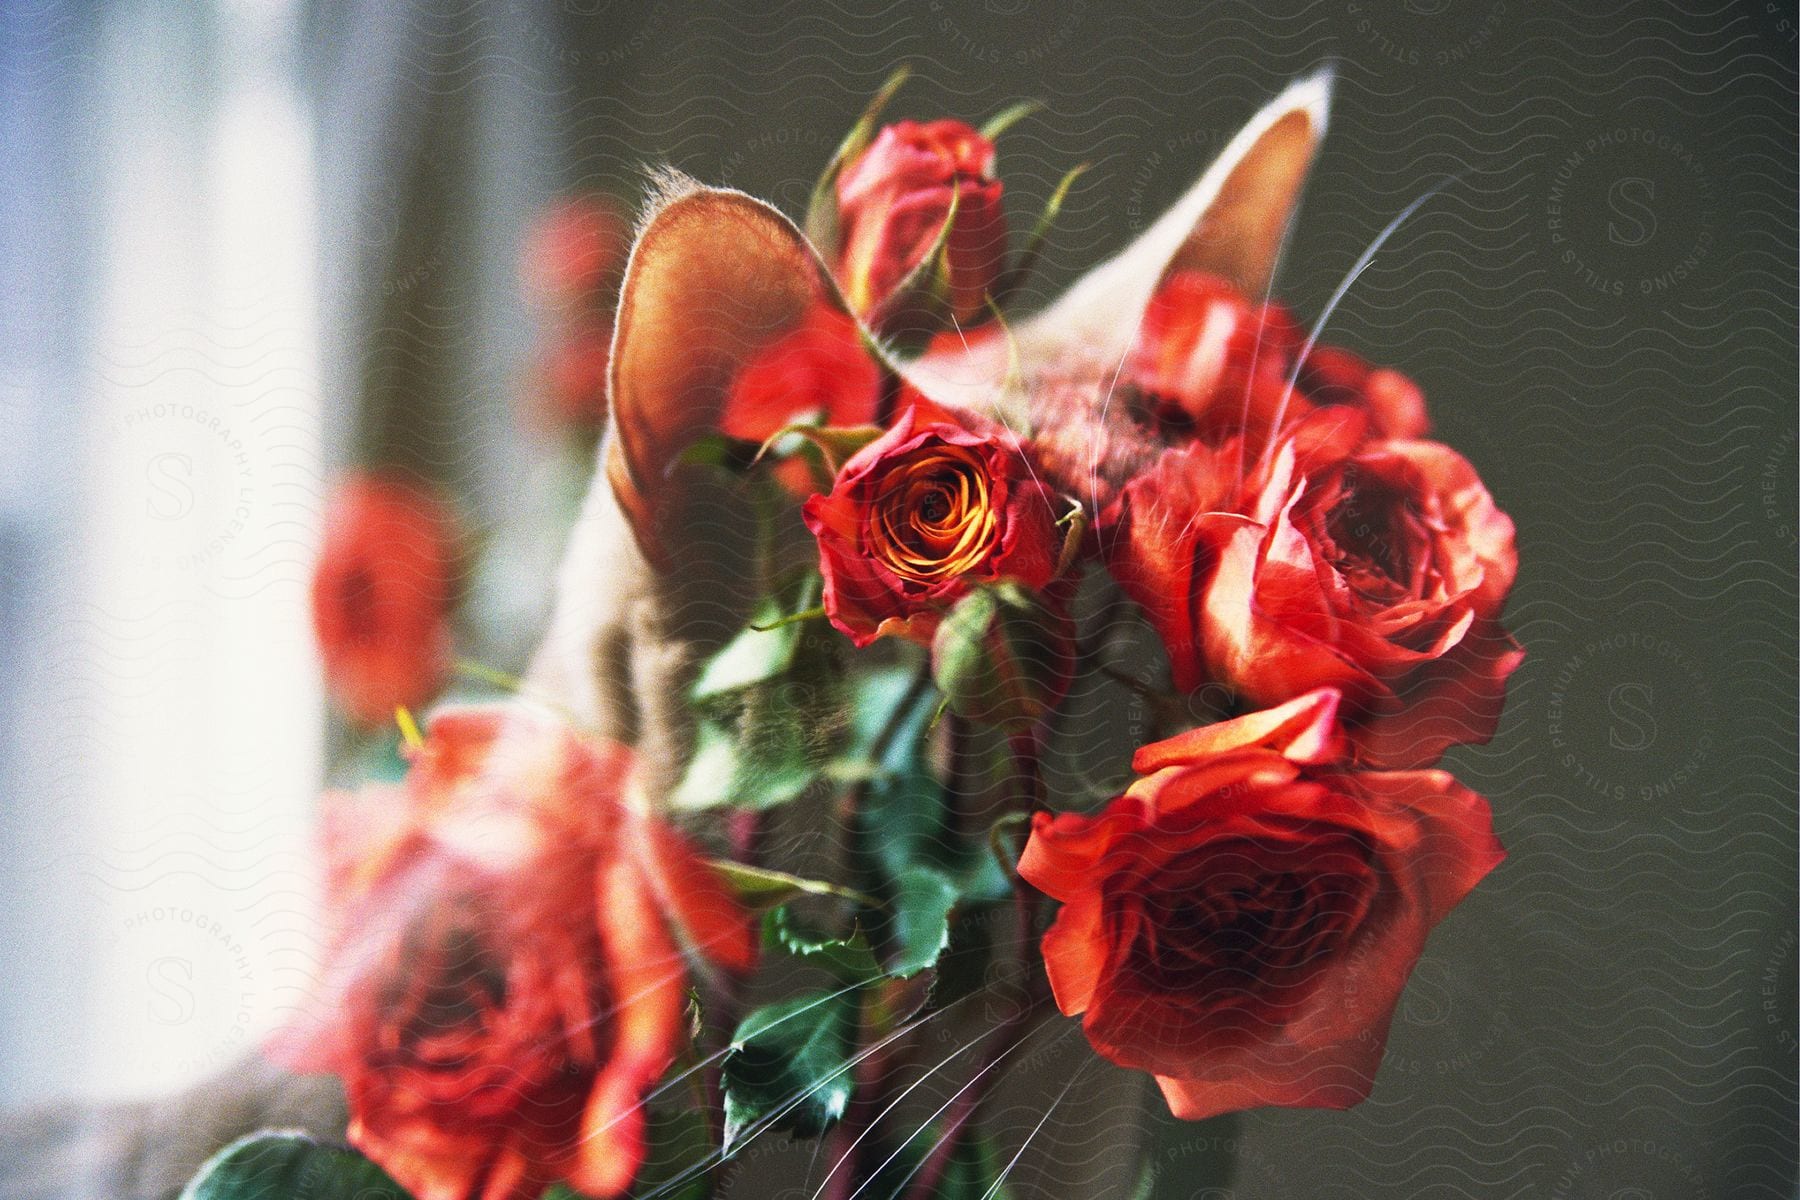 Double exposure of cat with red roses over head